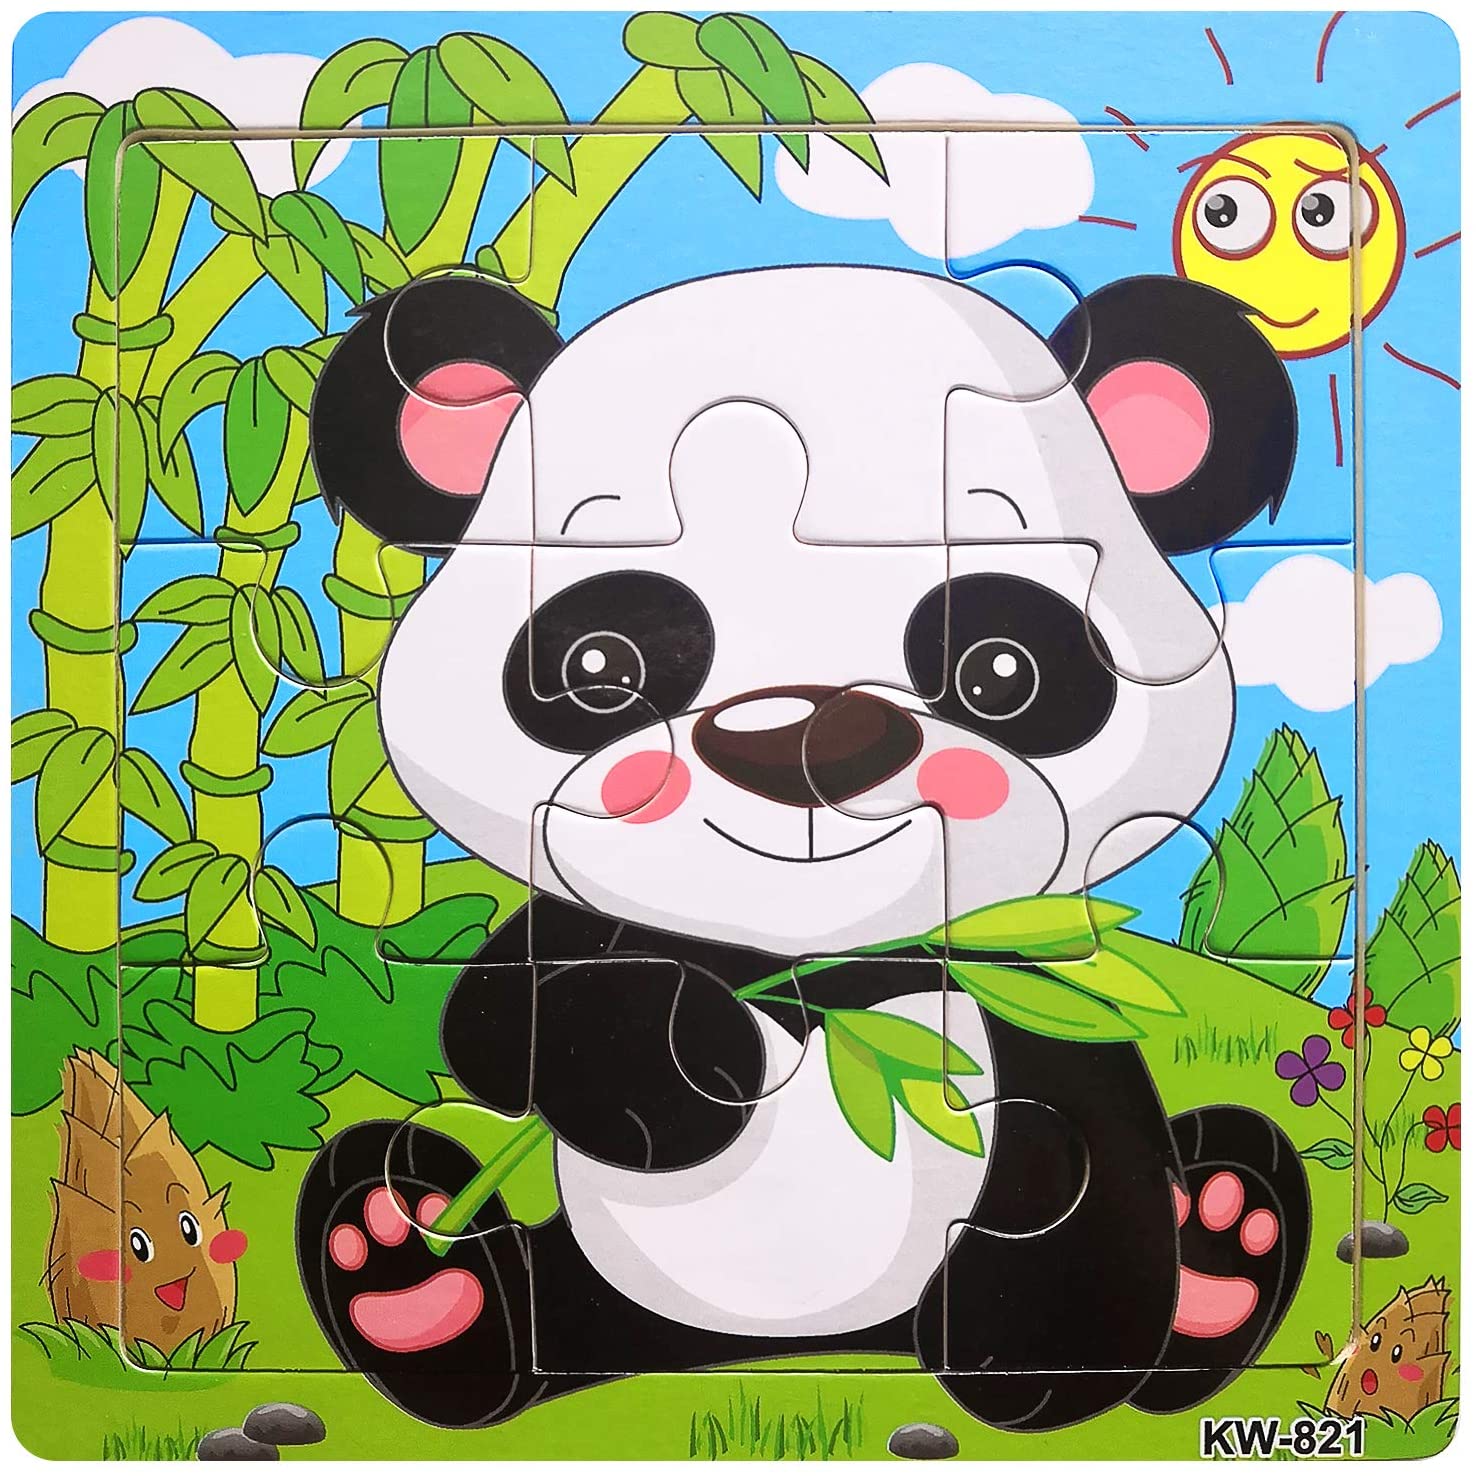 EverDirect Wooden Jigsaw Puzzles for Kids Ages 2-5 Toddler Puzzles 9 Pieces Preschool Educational Learning Toys Set Animals Puzzles for 2 3 4 Years Old Boys and Girls (4 Puzzles) - image 2 of 6